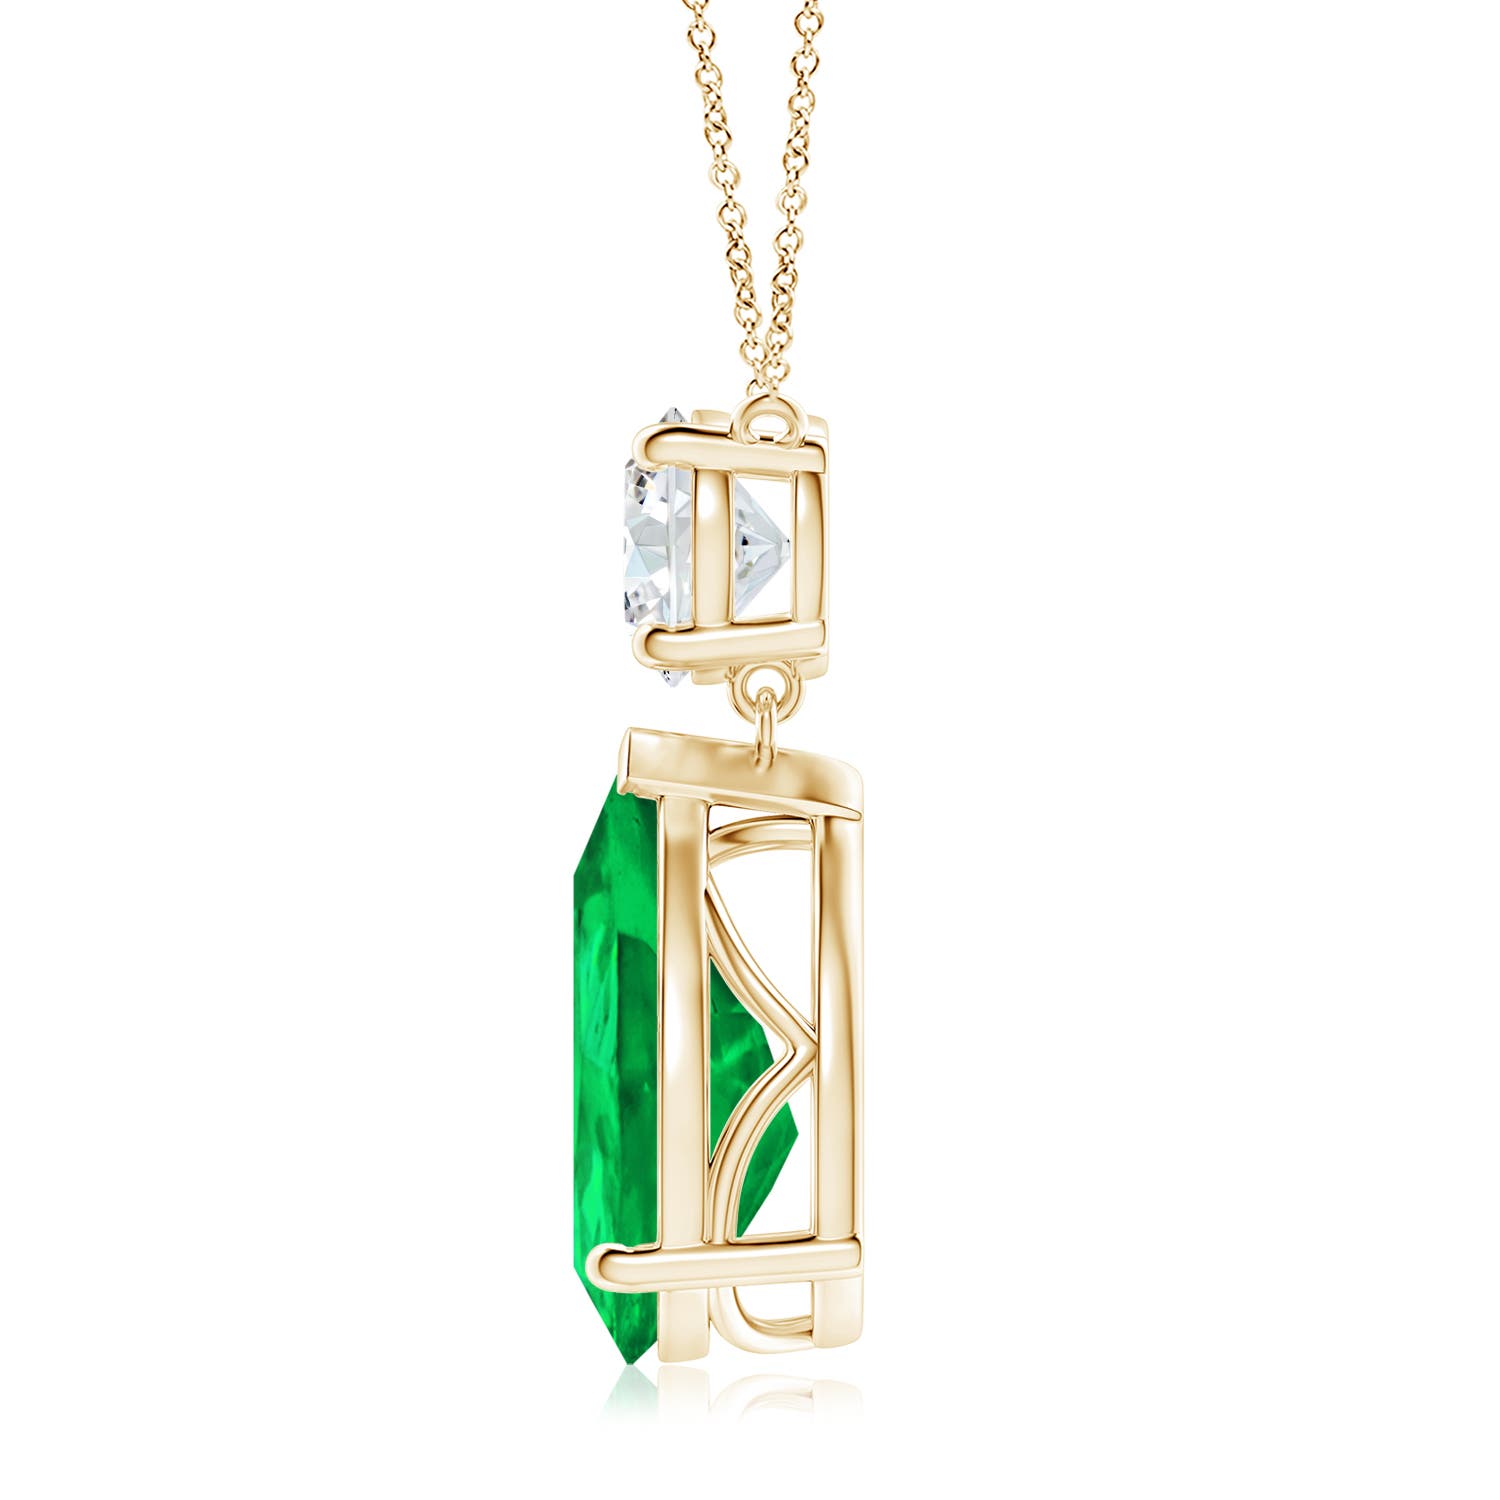 AAA - Emerald / 7.6 CT / 14 KT Yellow Gold